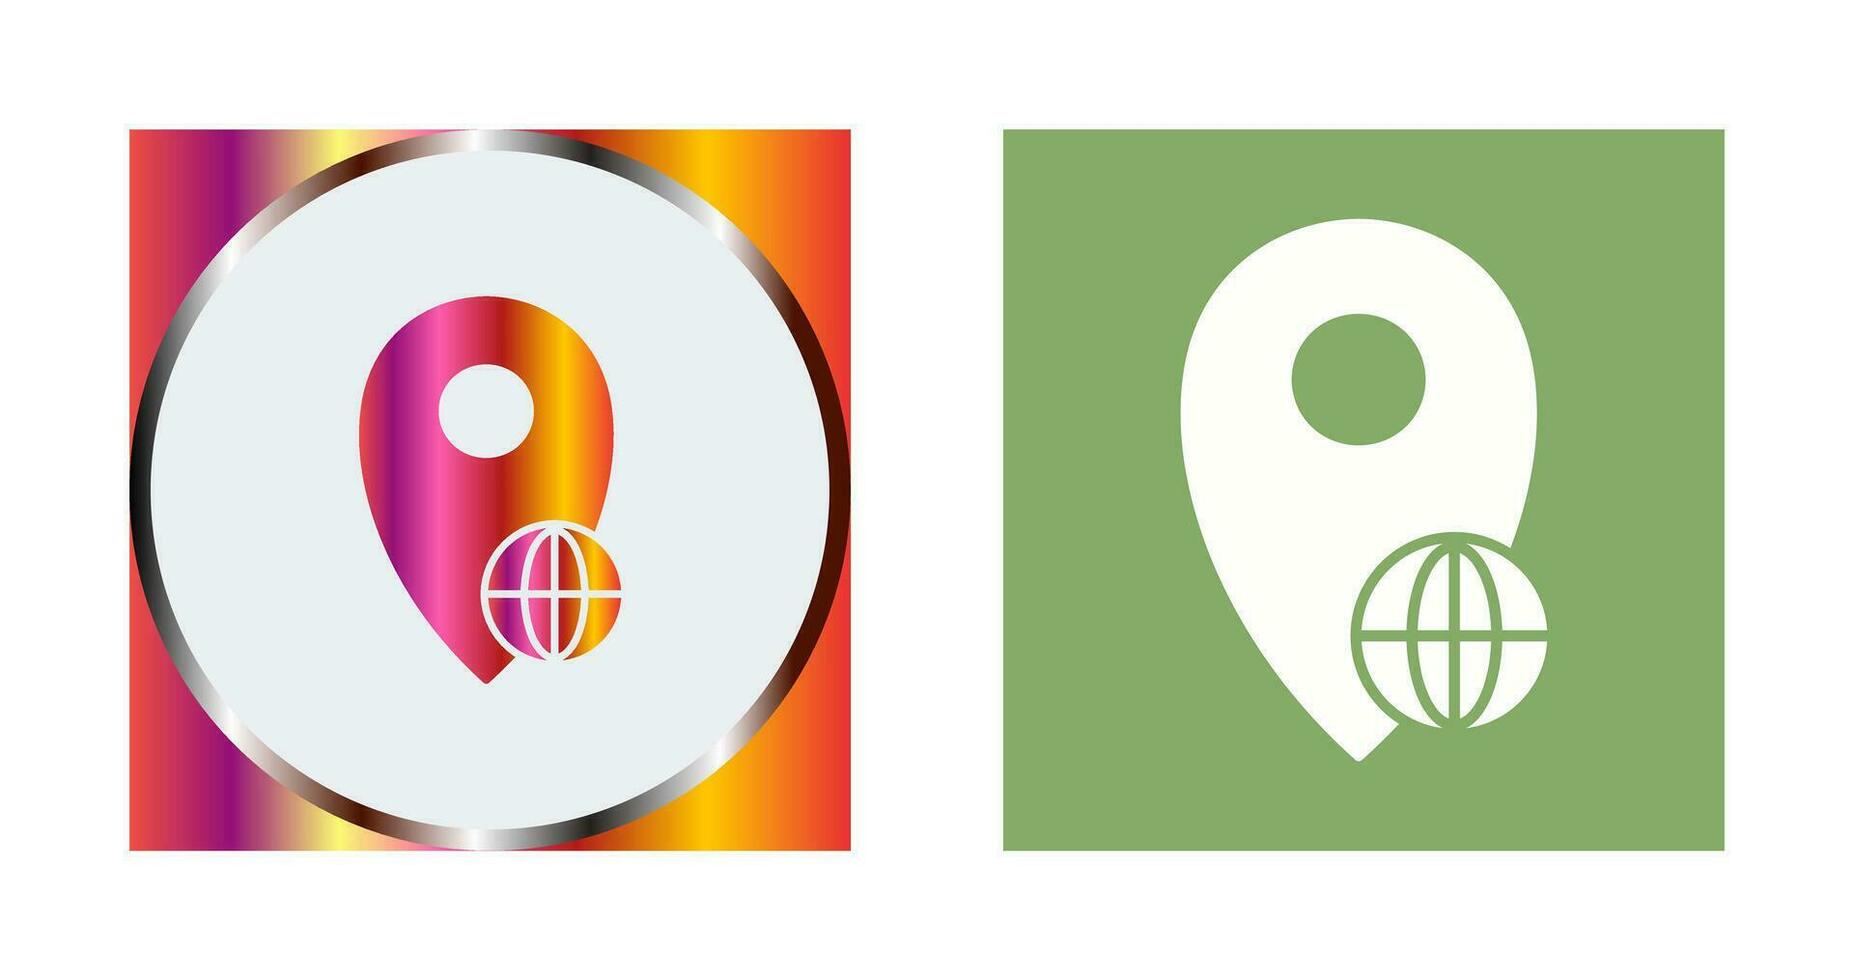 Global Locations Vector Icon